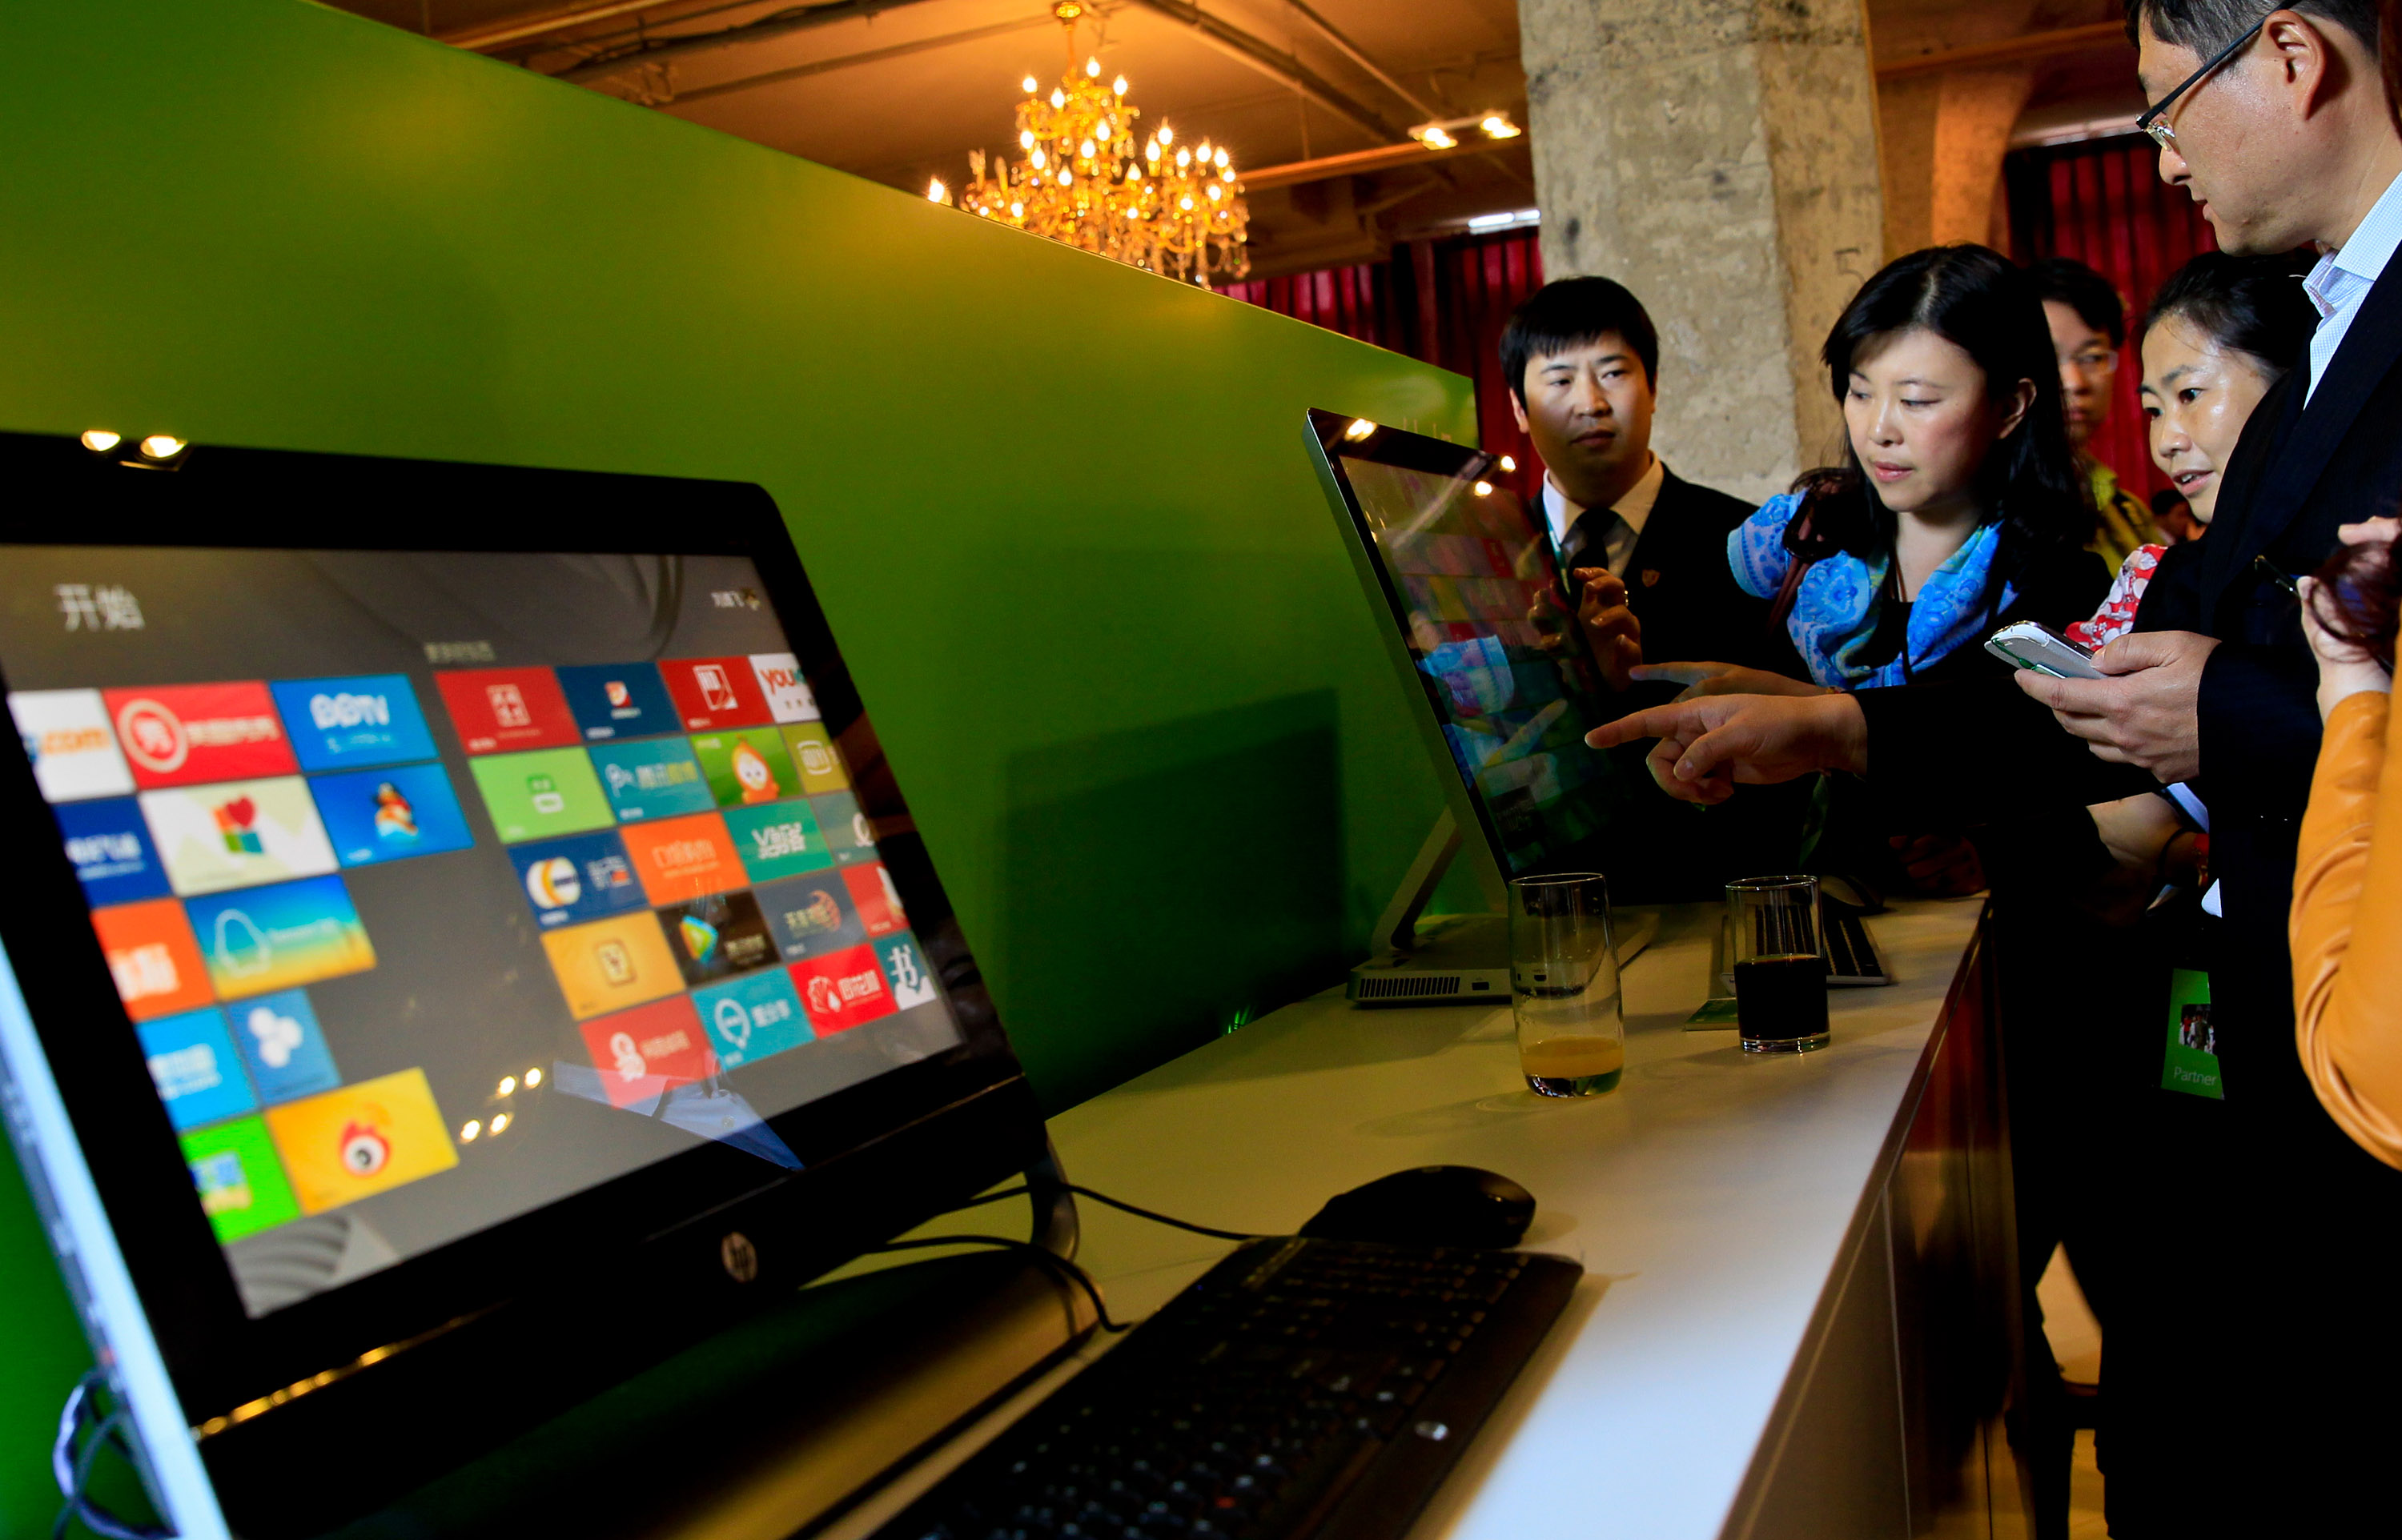 Guests try out the Microsoft Windows 8 operation system on touchable screens of desktop computers during the preview show of the new operation system and tablet computer Surface in Shanghai, China, Oct. 23, 2012. (An Tu—EPA)